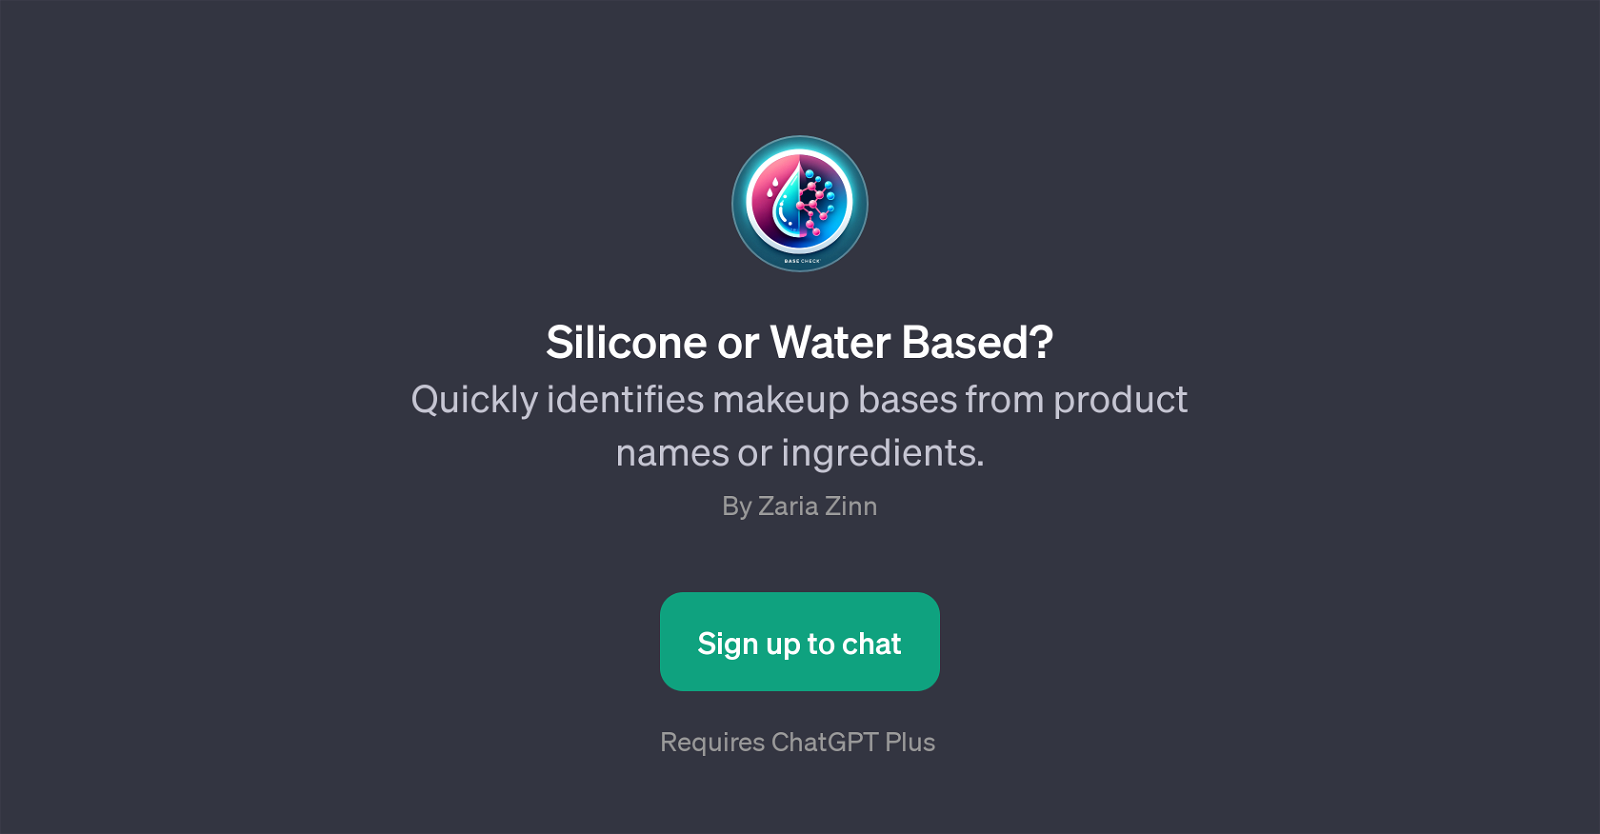 Silicone or Water Based? website